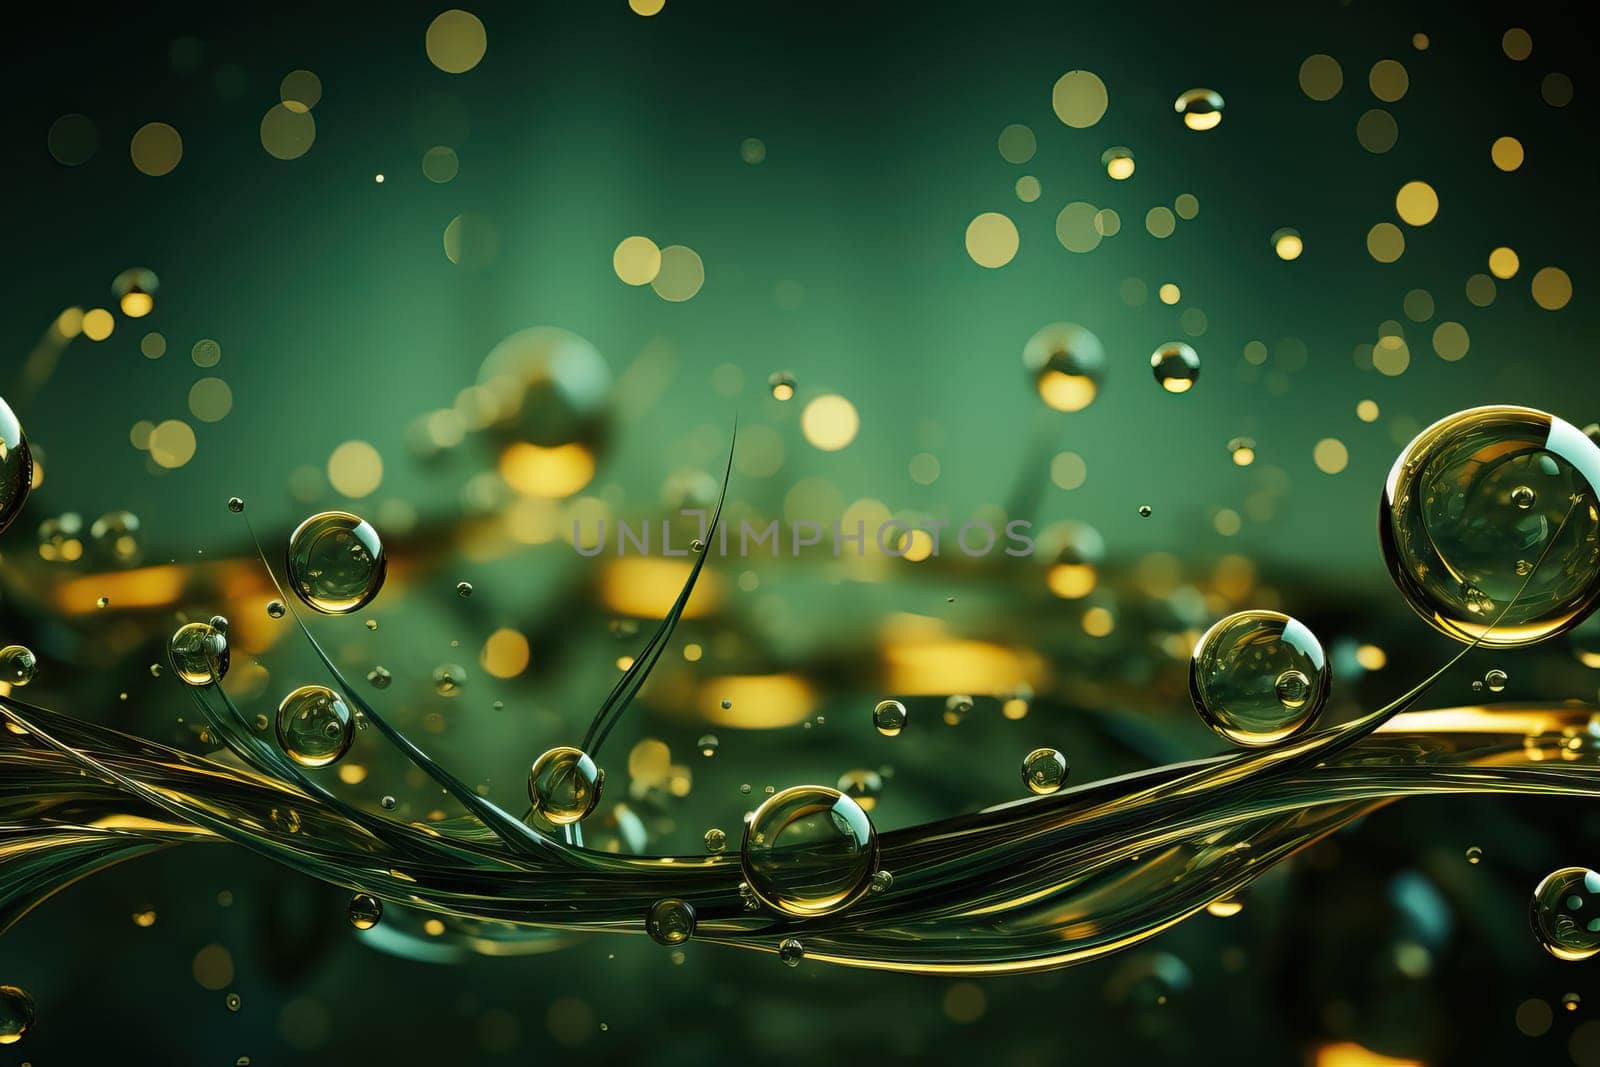 Abstract background with drops of olive tone and color illuminated by yellow light, drops of different shapes close-up.